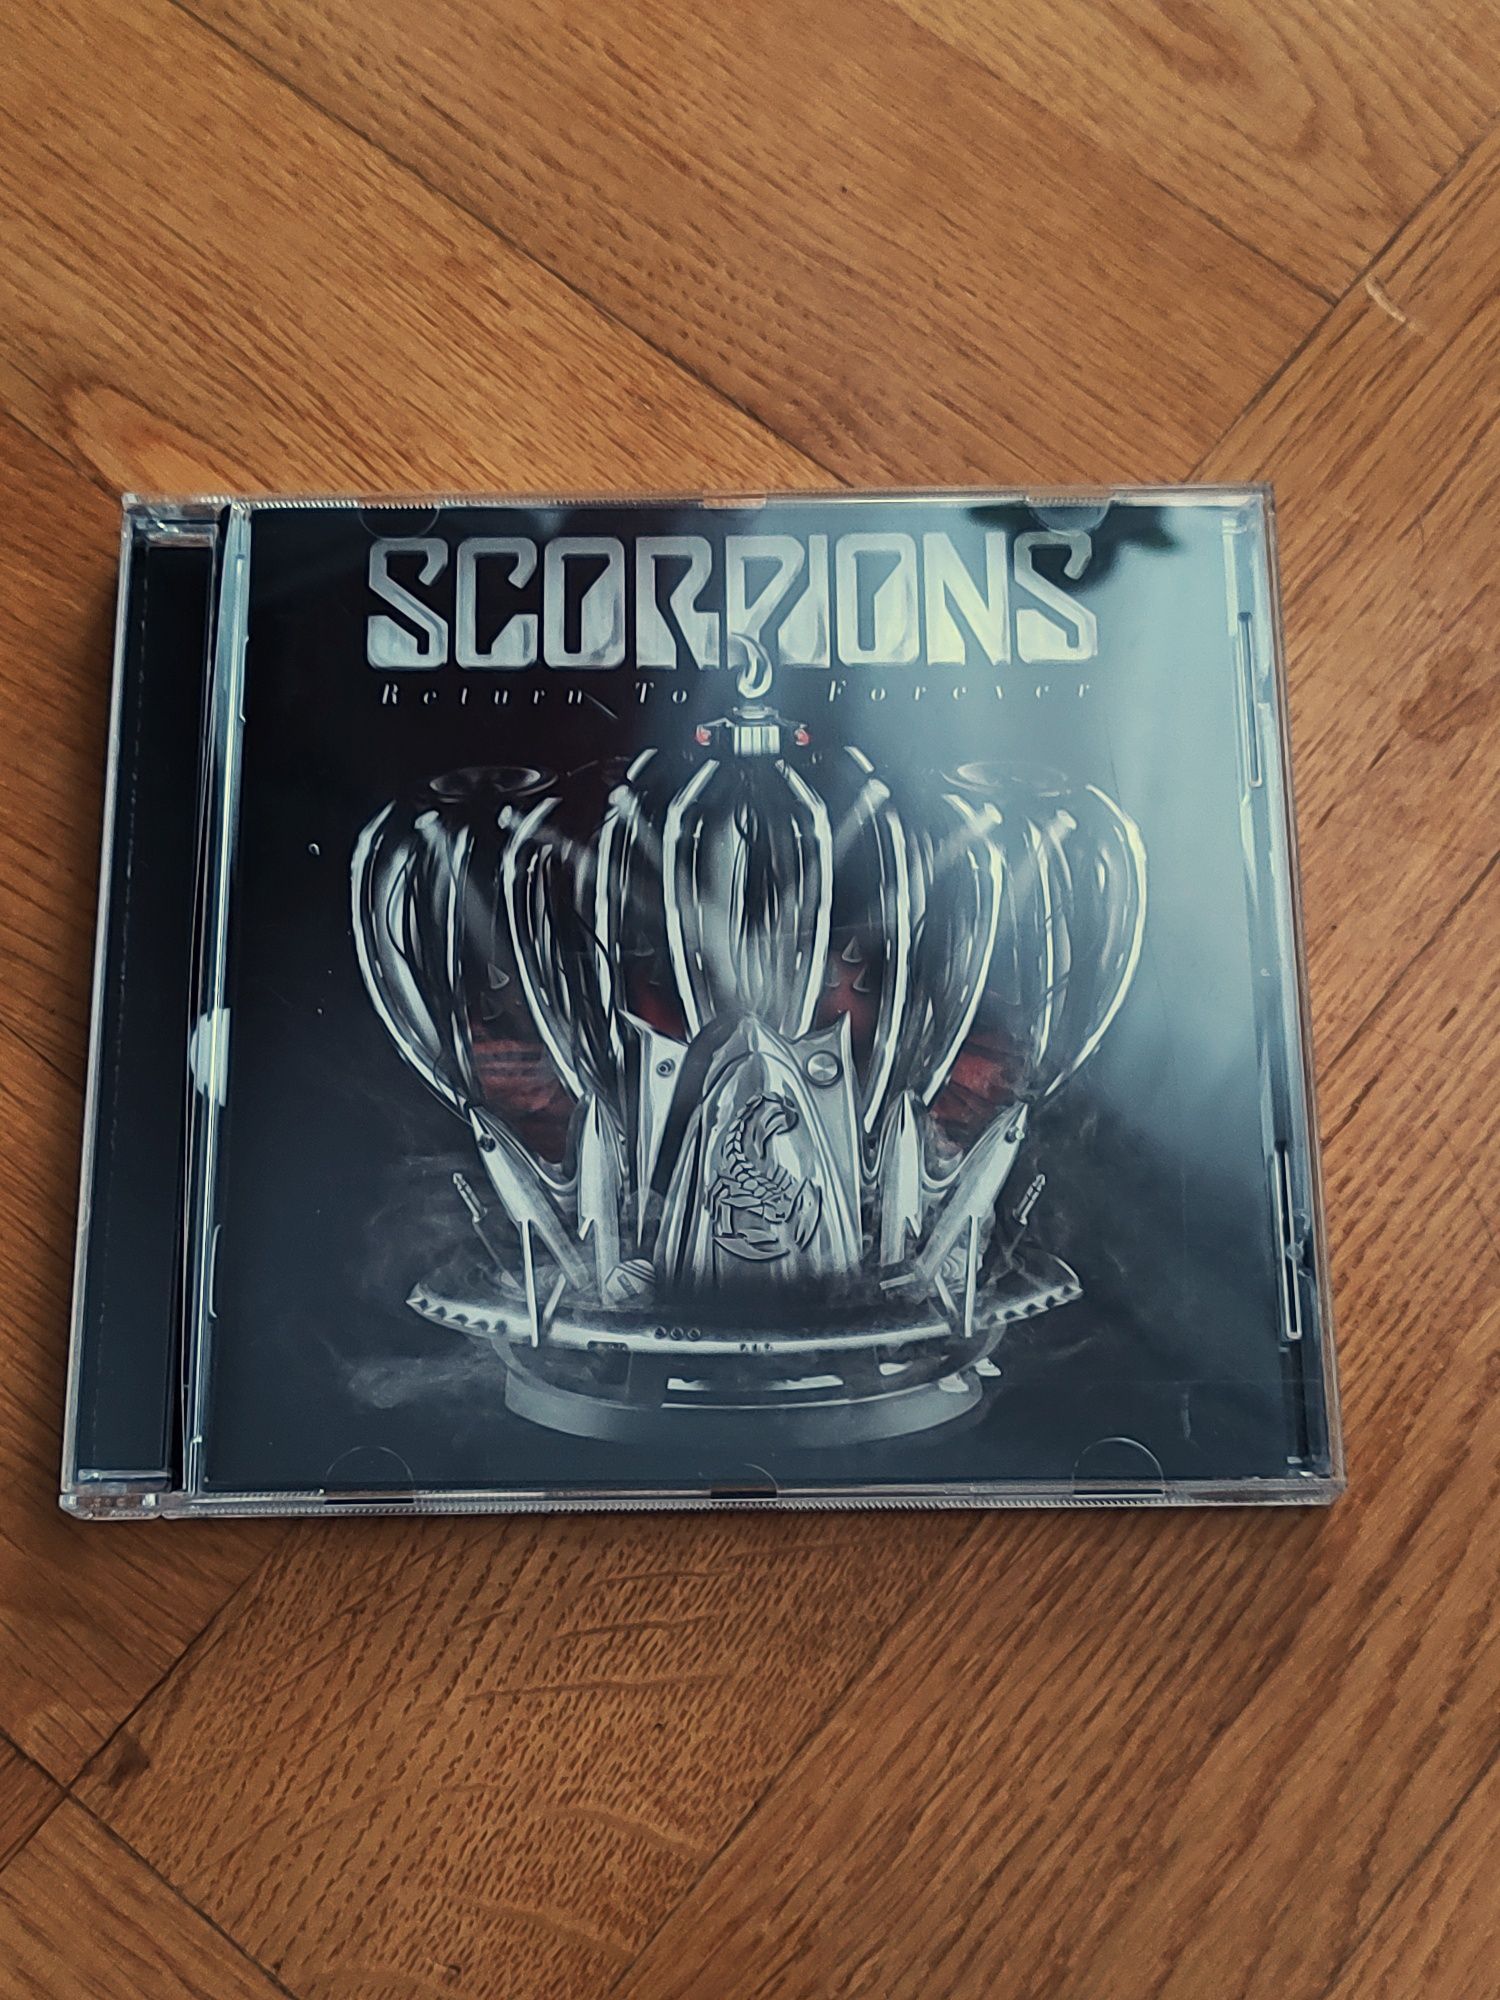 Scorpions Return to Forever CD